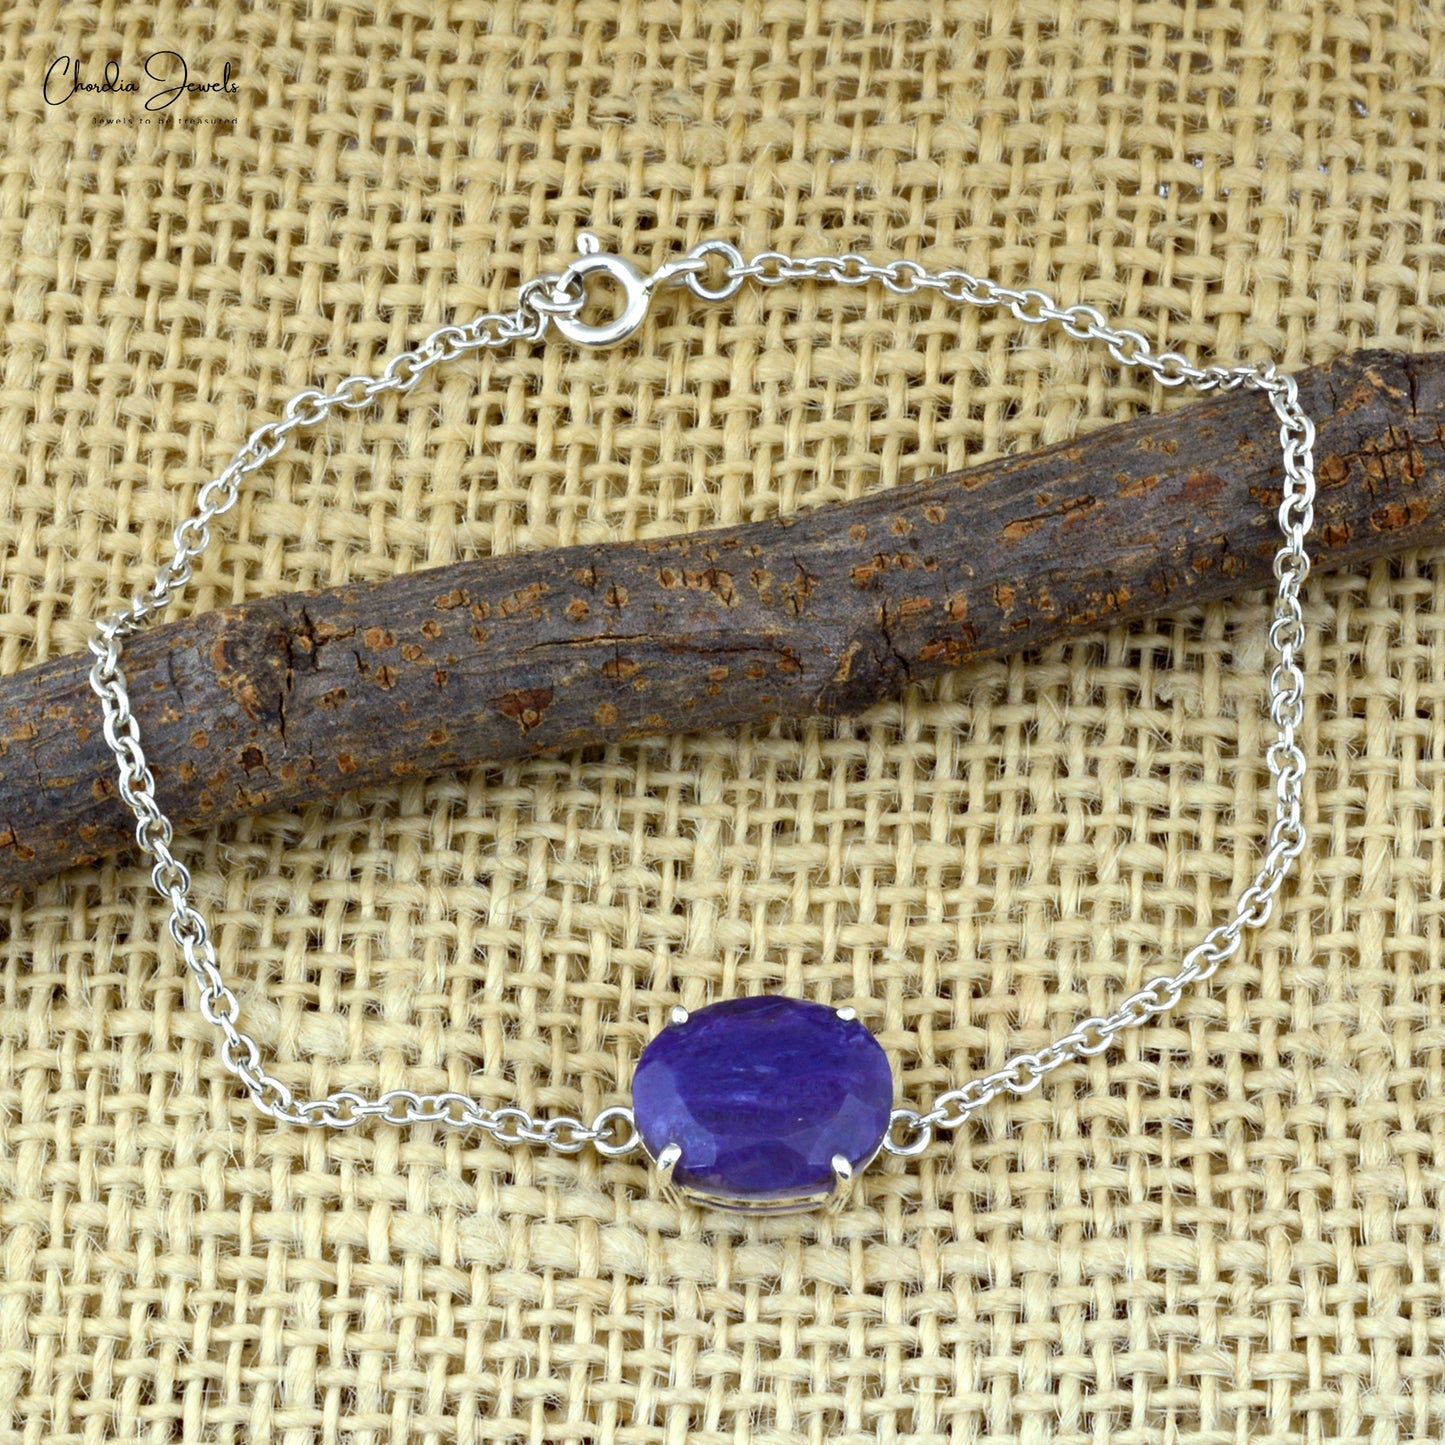 Natural Charoite Flexible Bracelet In 925 Sterling Silver Oval Gemstone Jewelry From Top Supplier At Offer Price